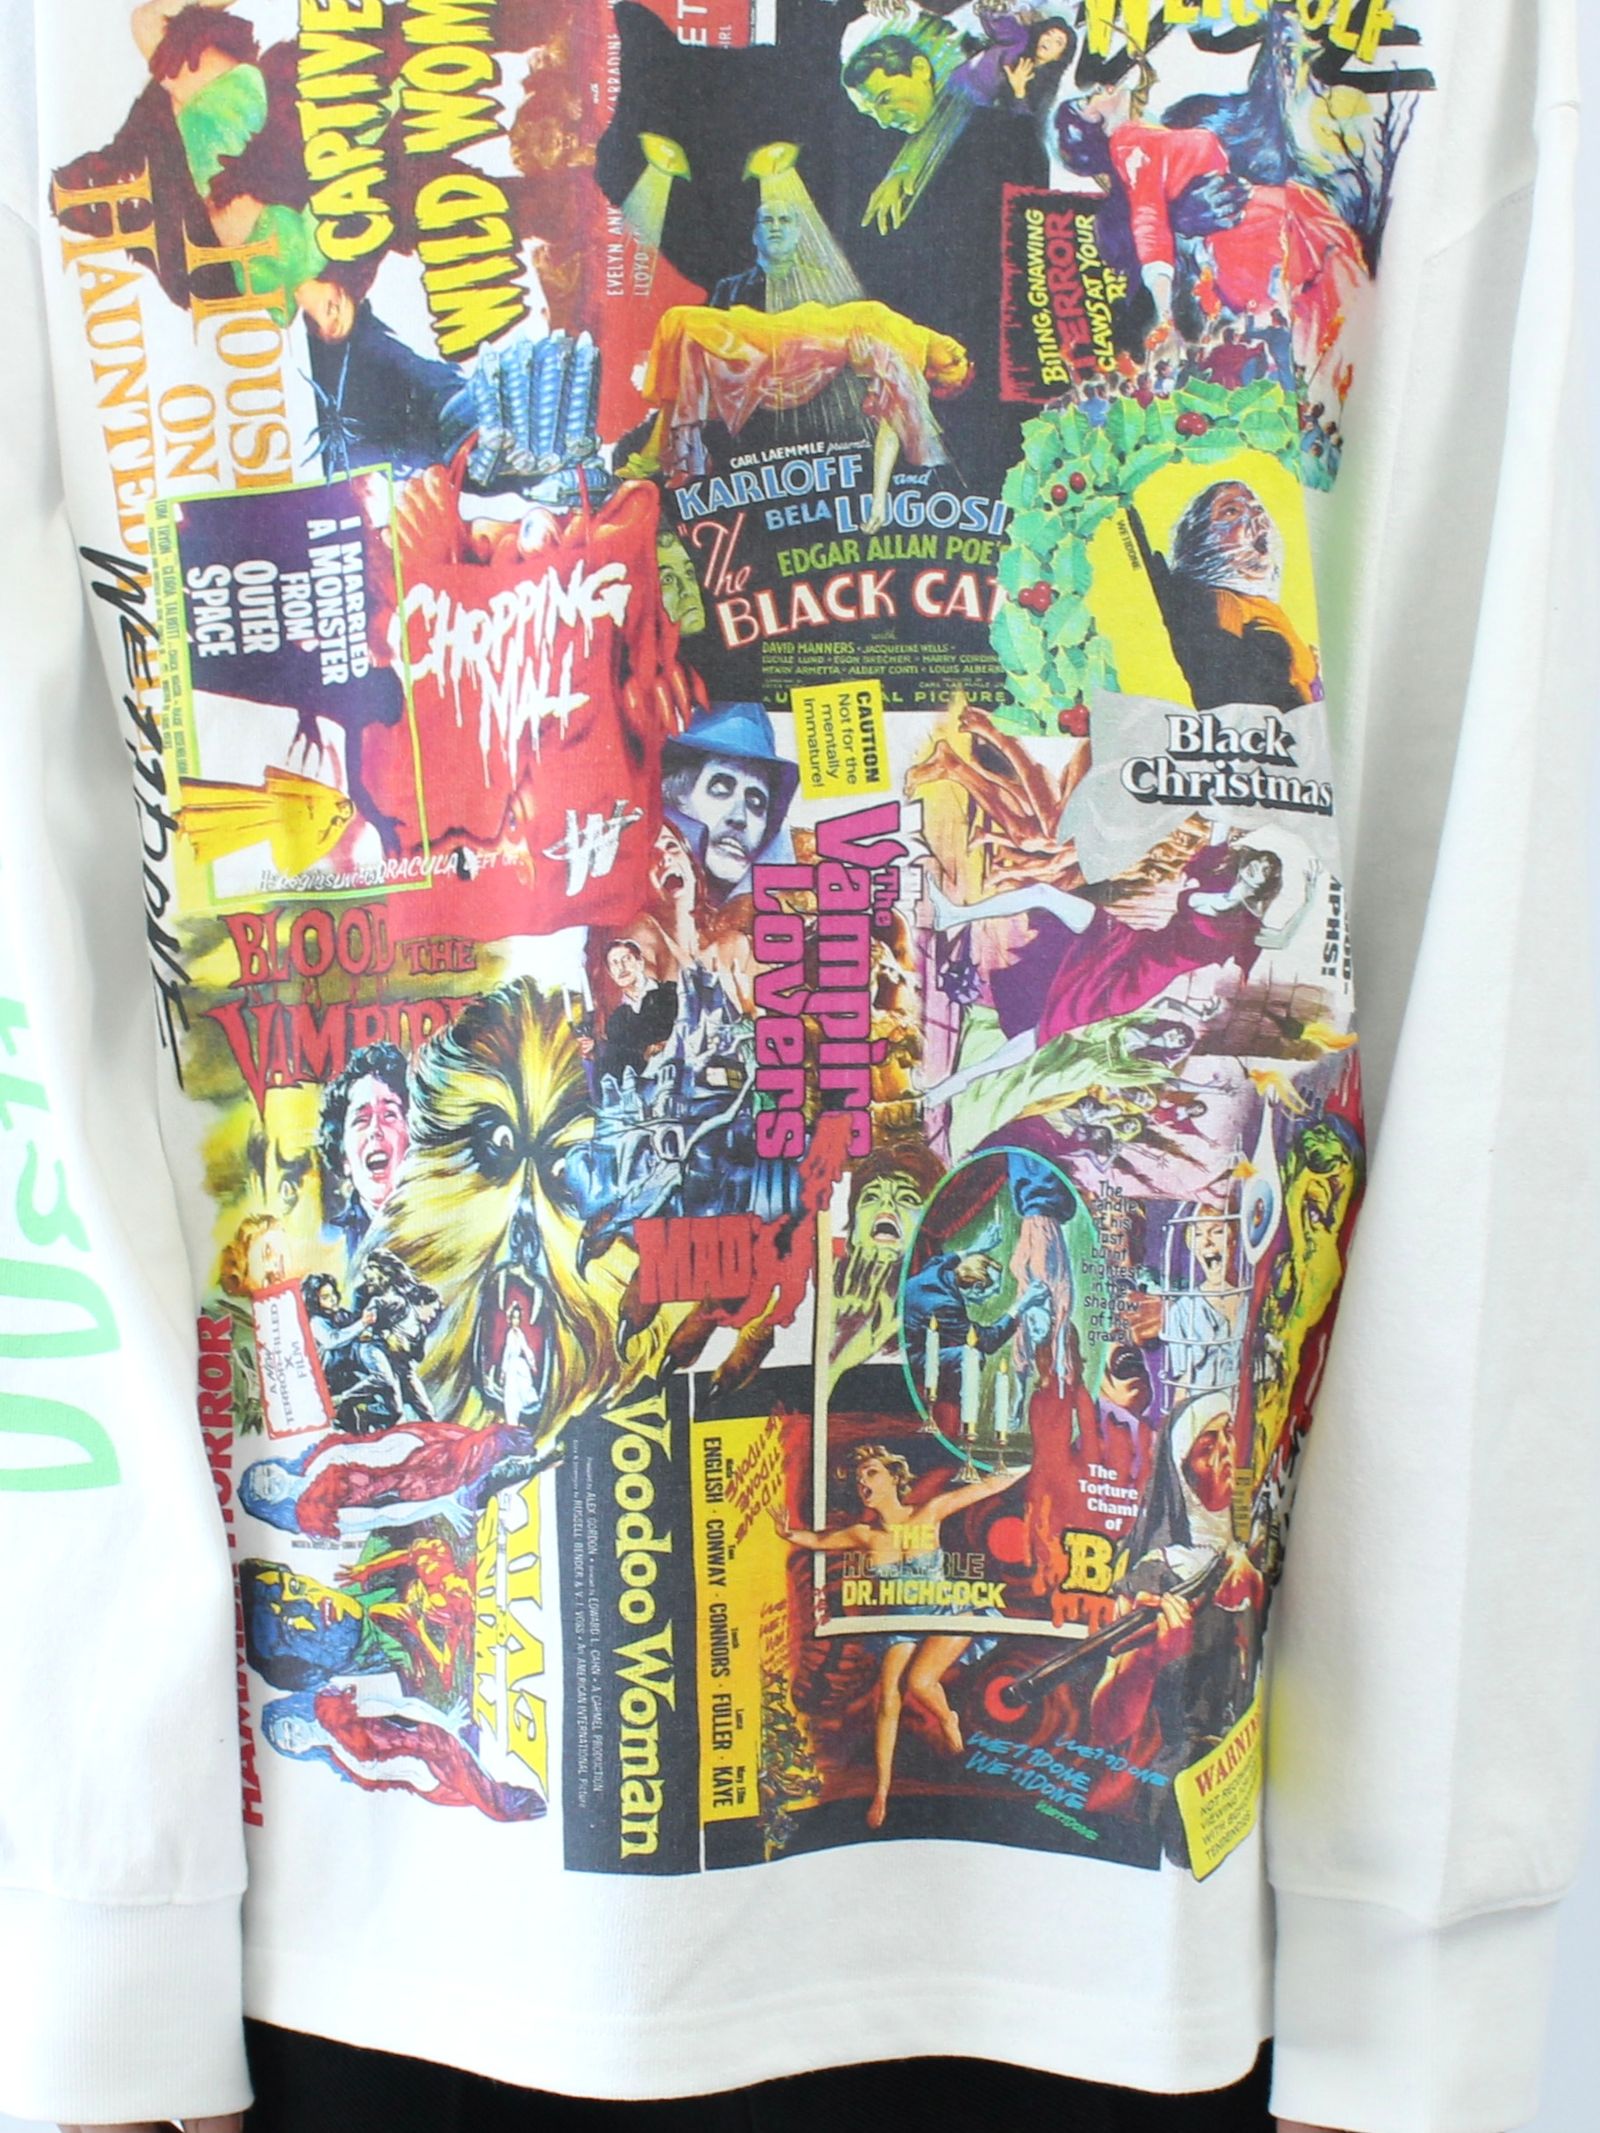 WE11DONE 22AW Horror Collage Top着丈740cm